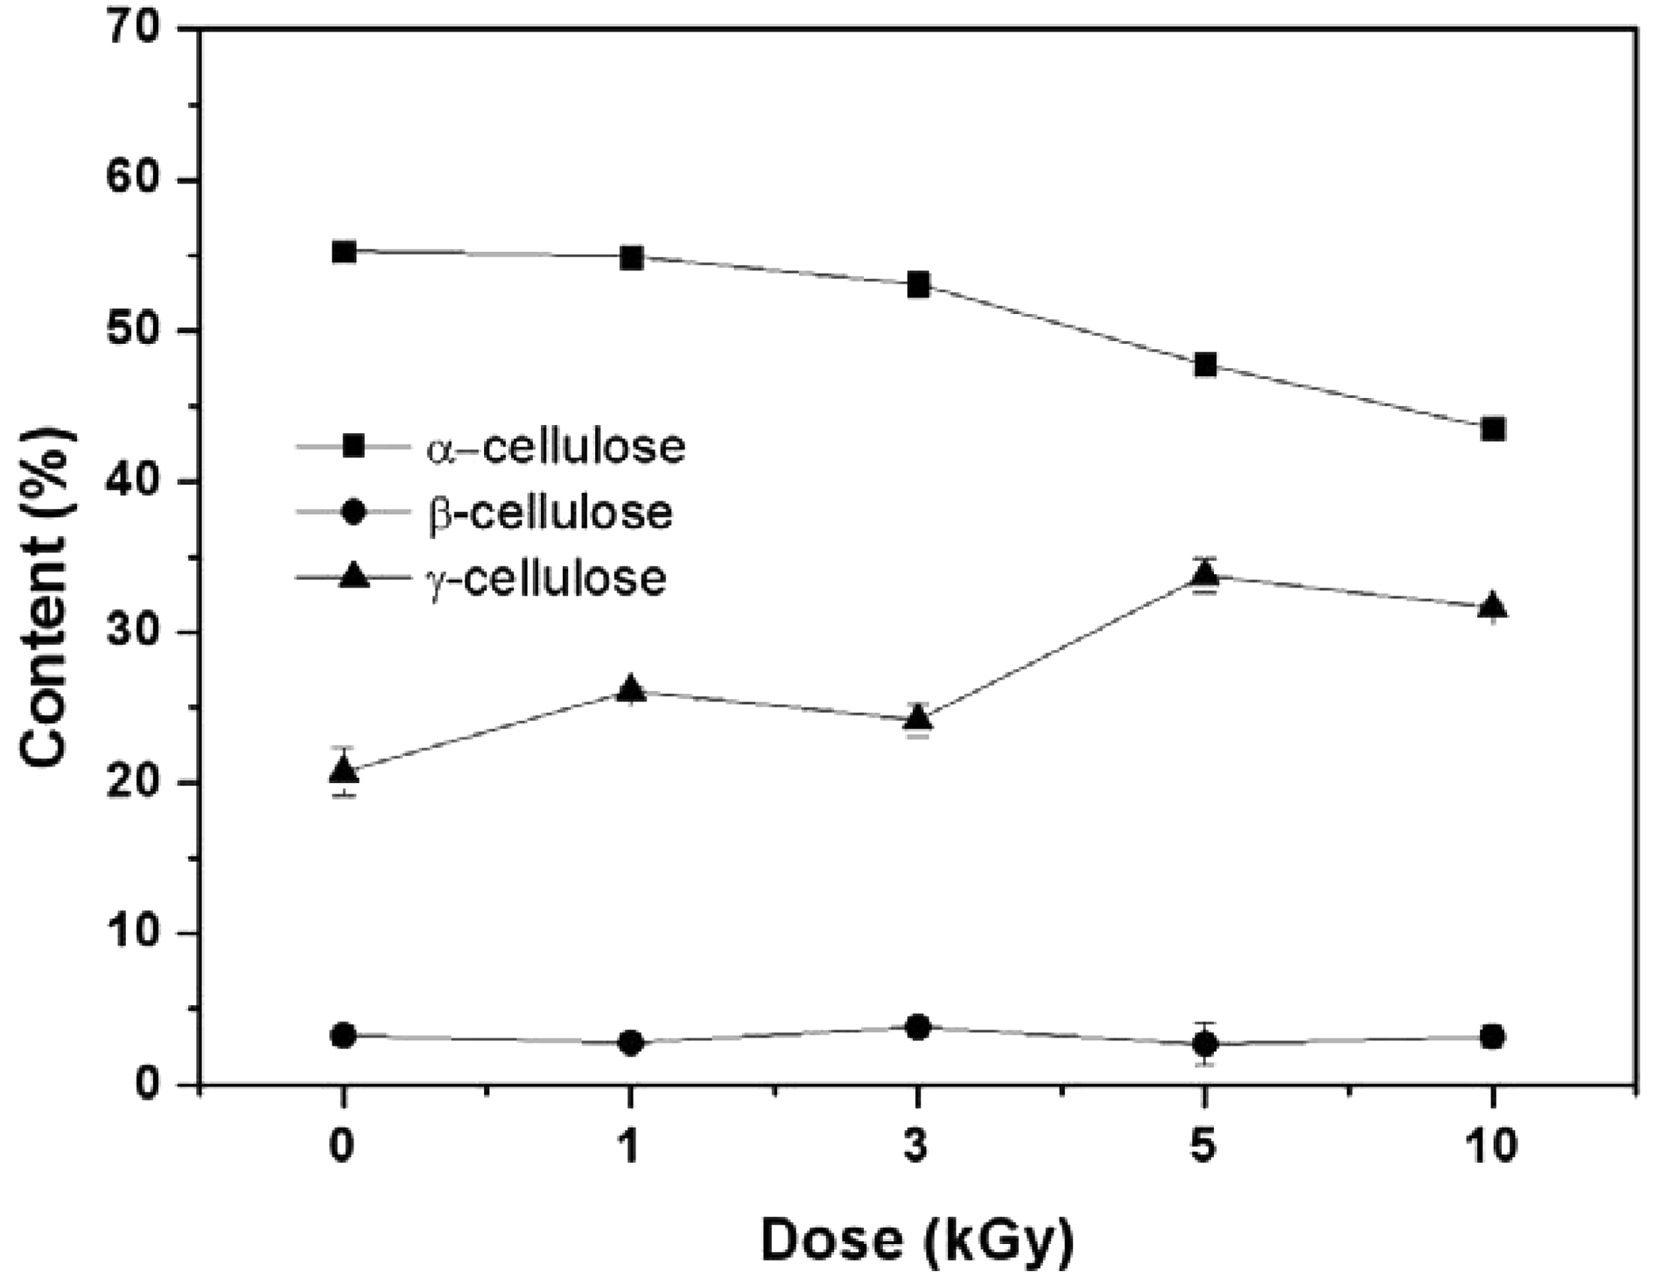 The contents of α, β and γ-cellulose.